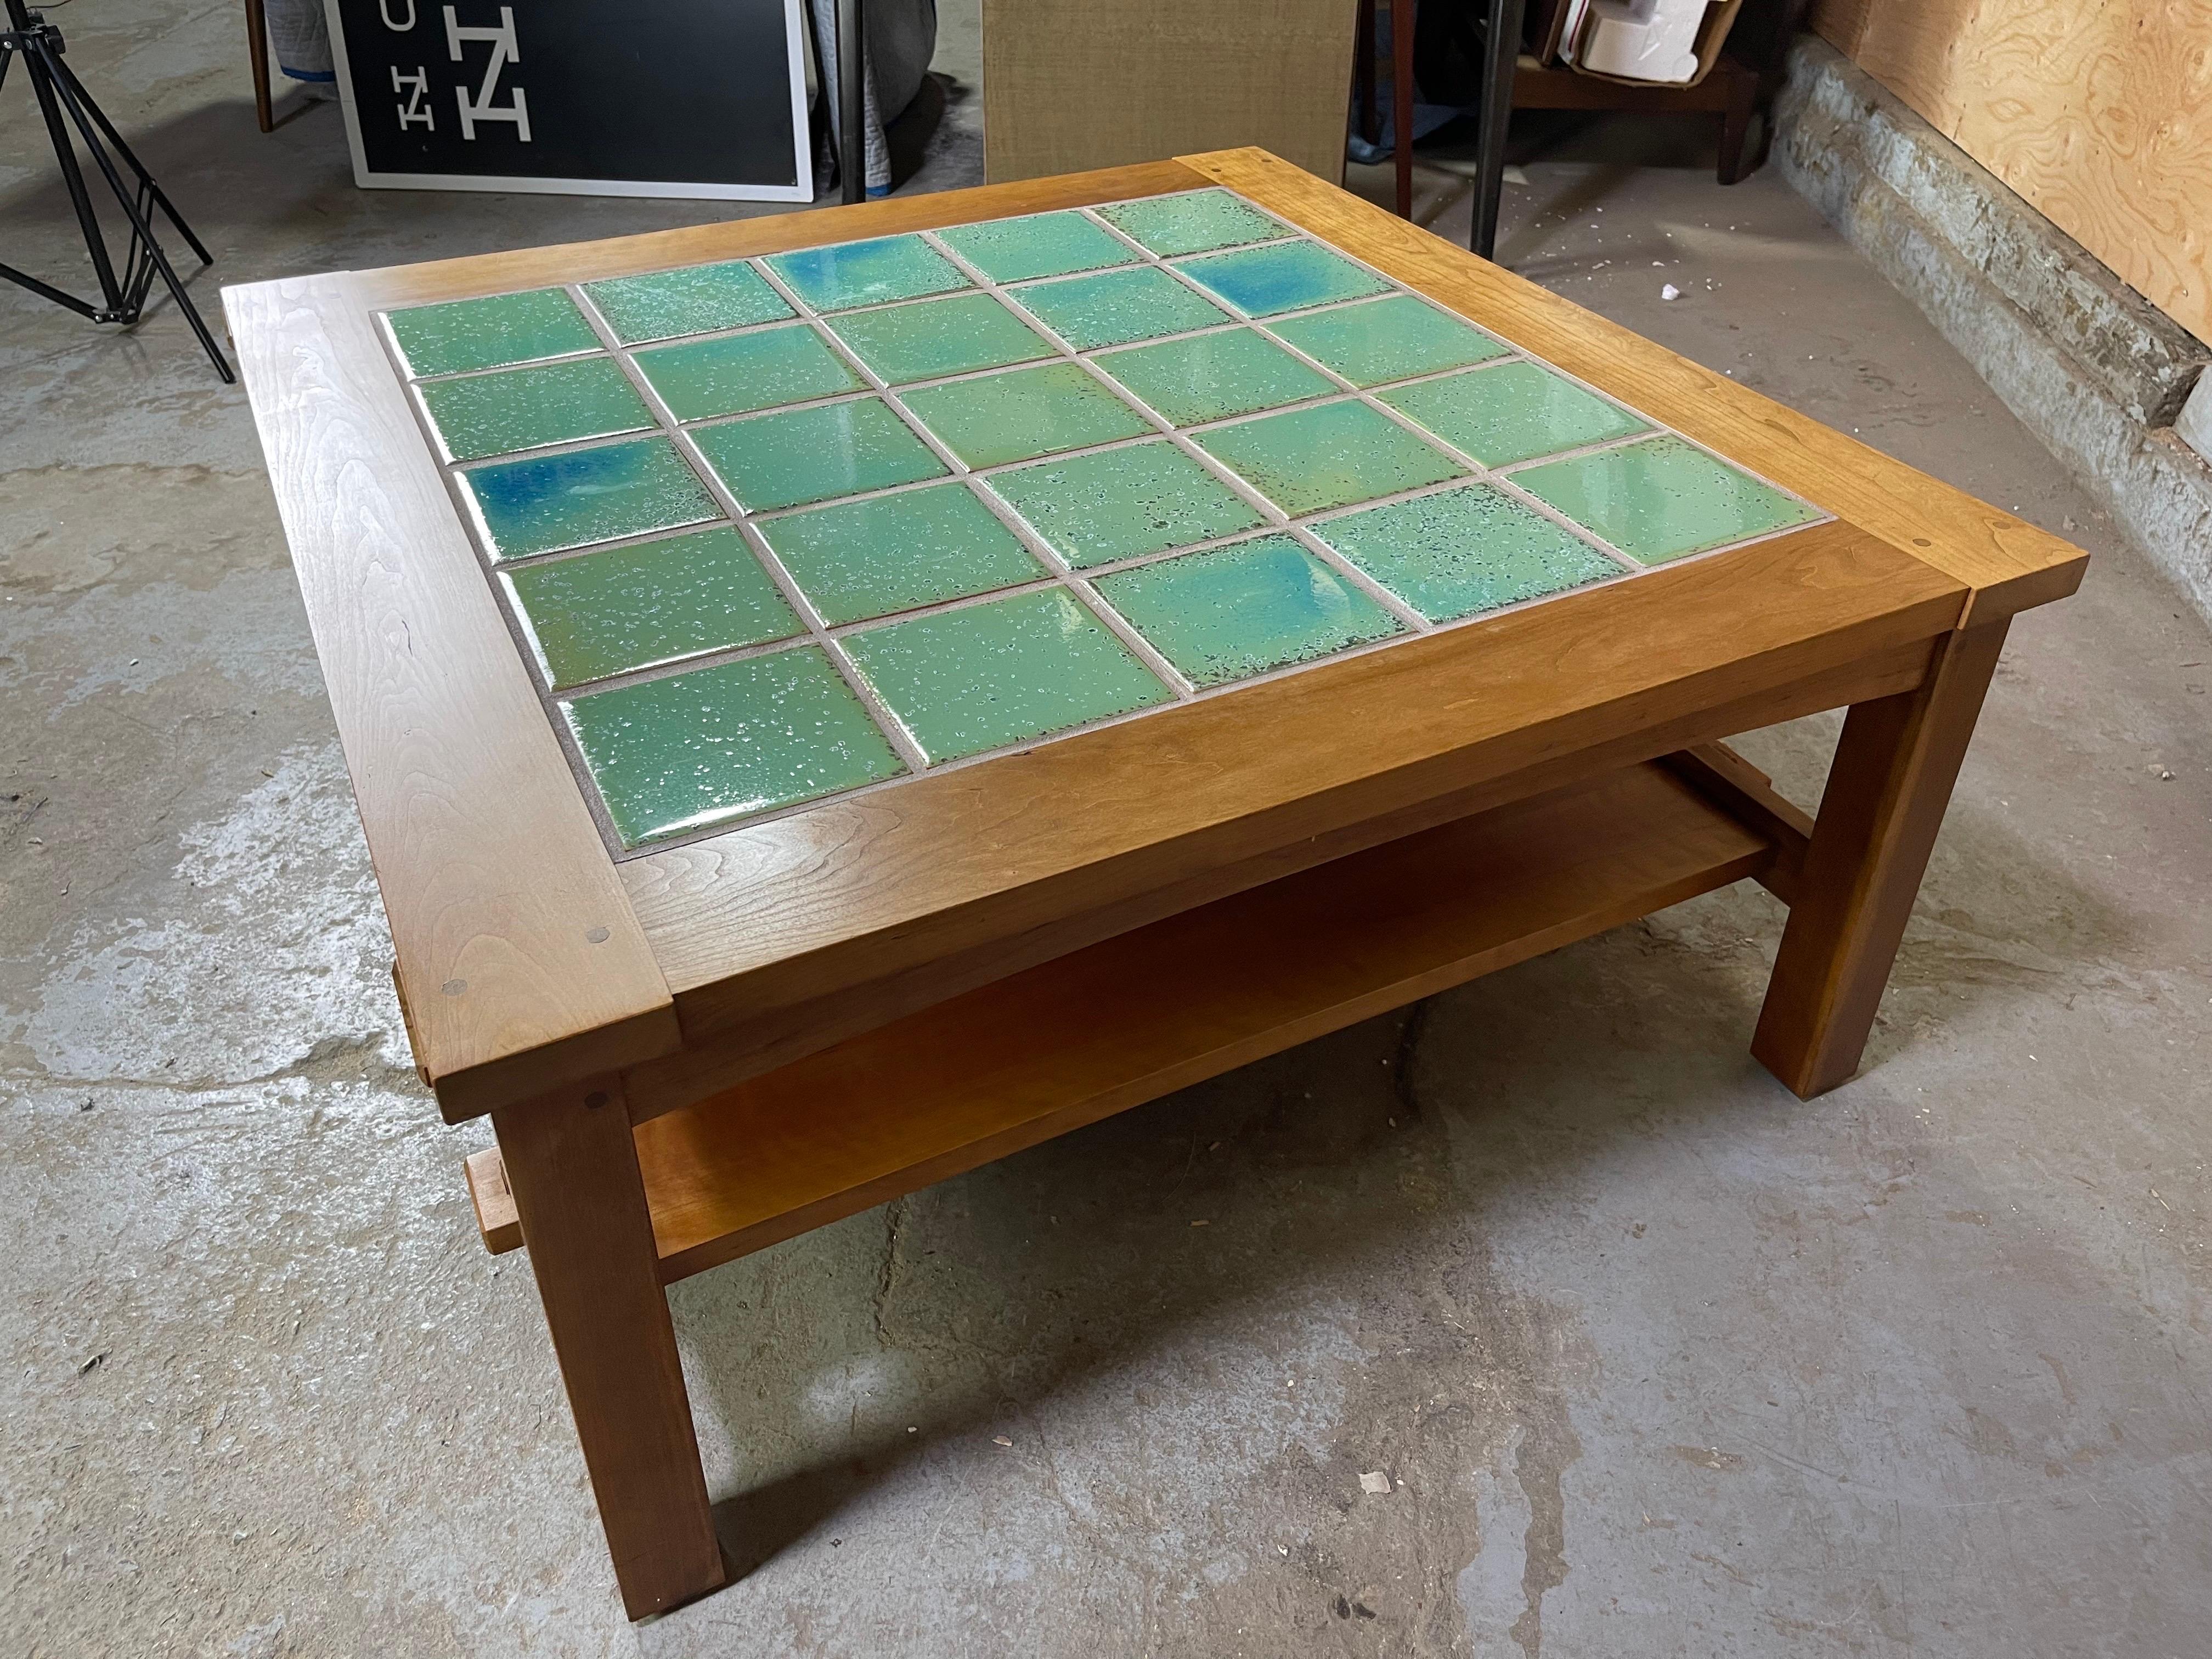 Great teal blue tiled top stickley coffee table. Heavy and sturdy. This thing can support some weight! Tiles are beautiful and as always excellent craftsmanship. Made in 2001. Some light wear - see pictures. 
38.5